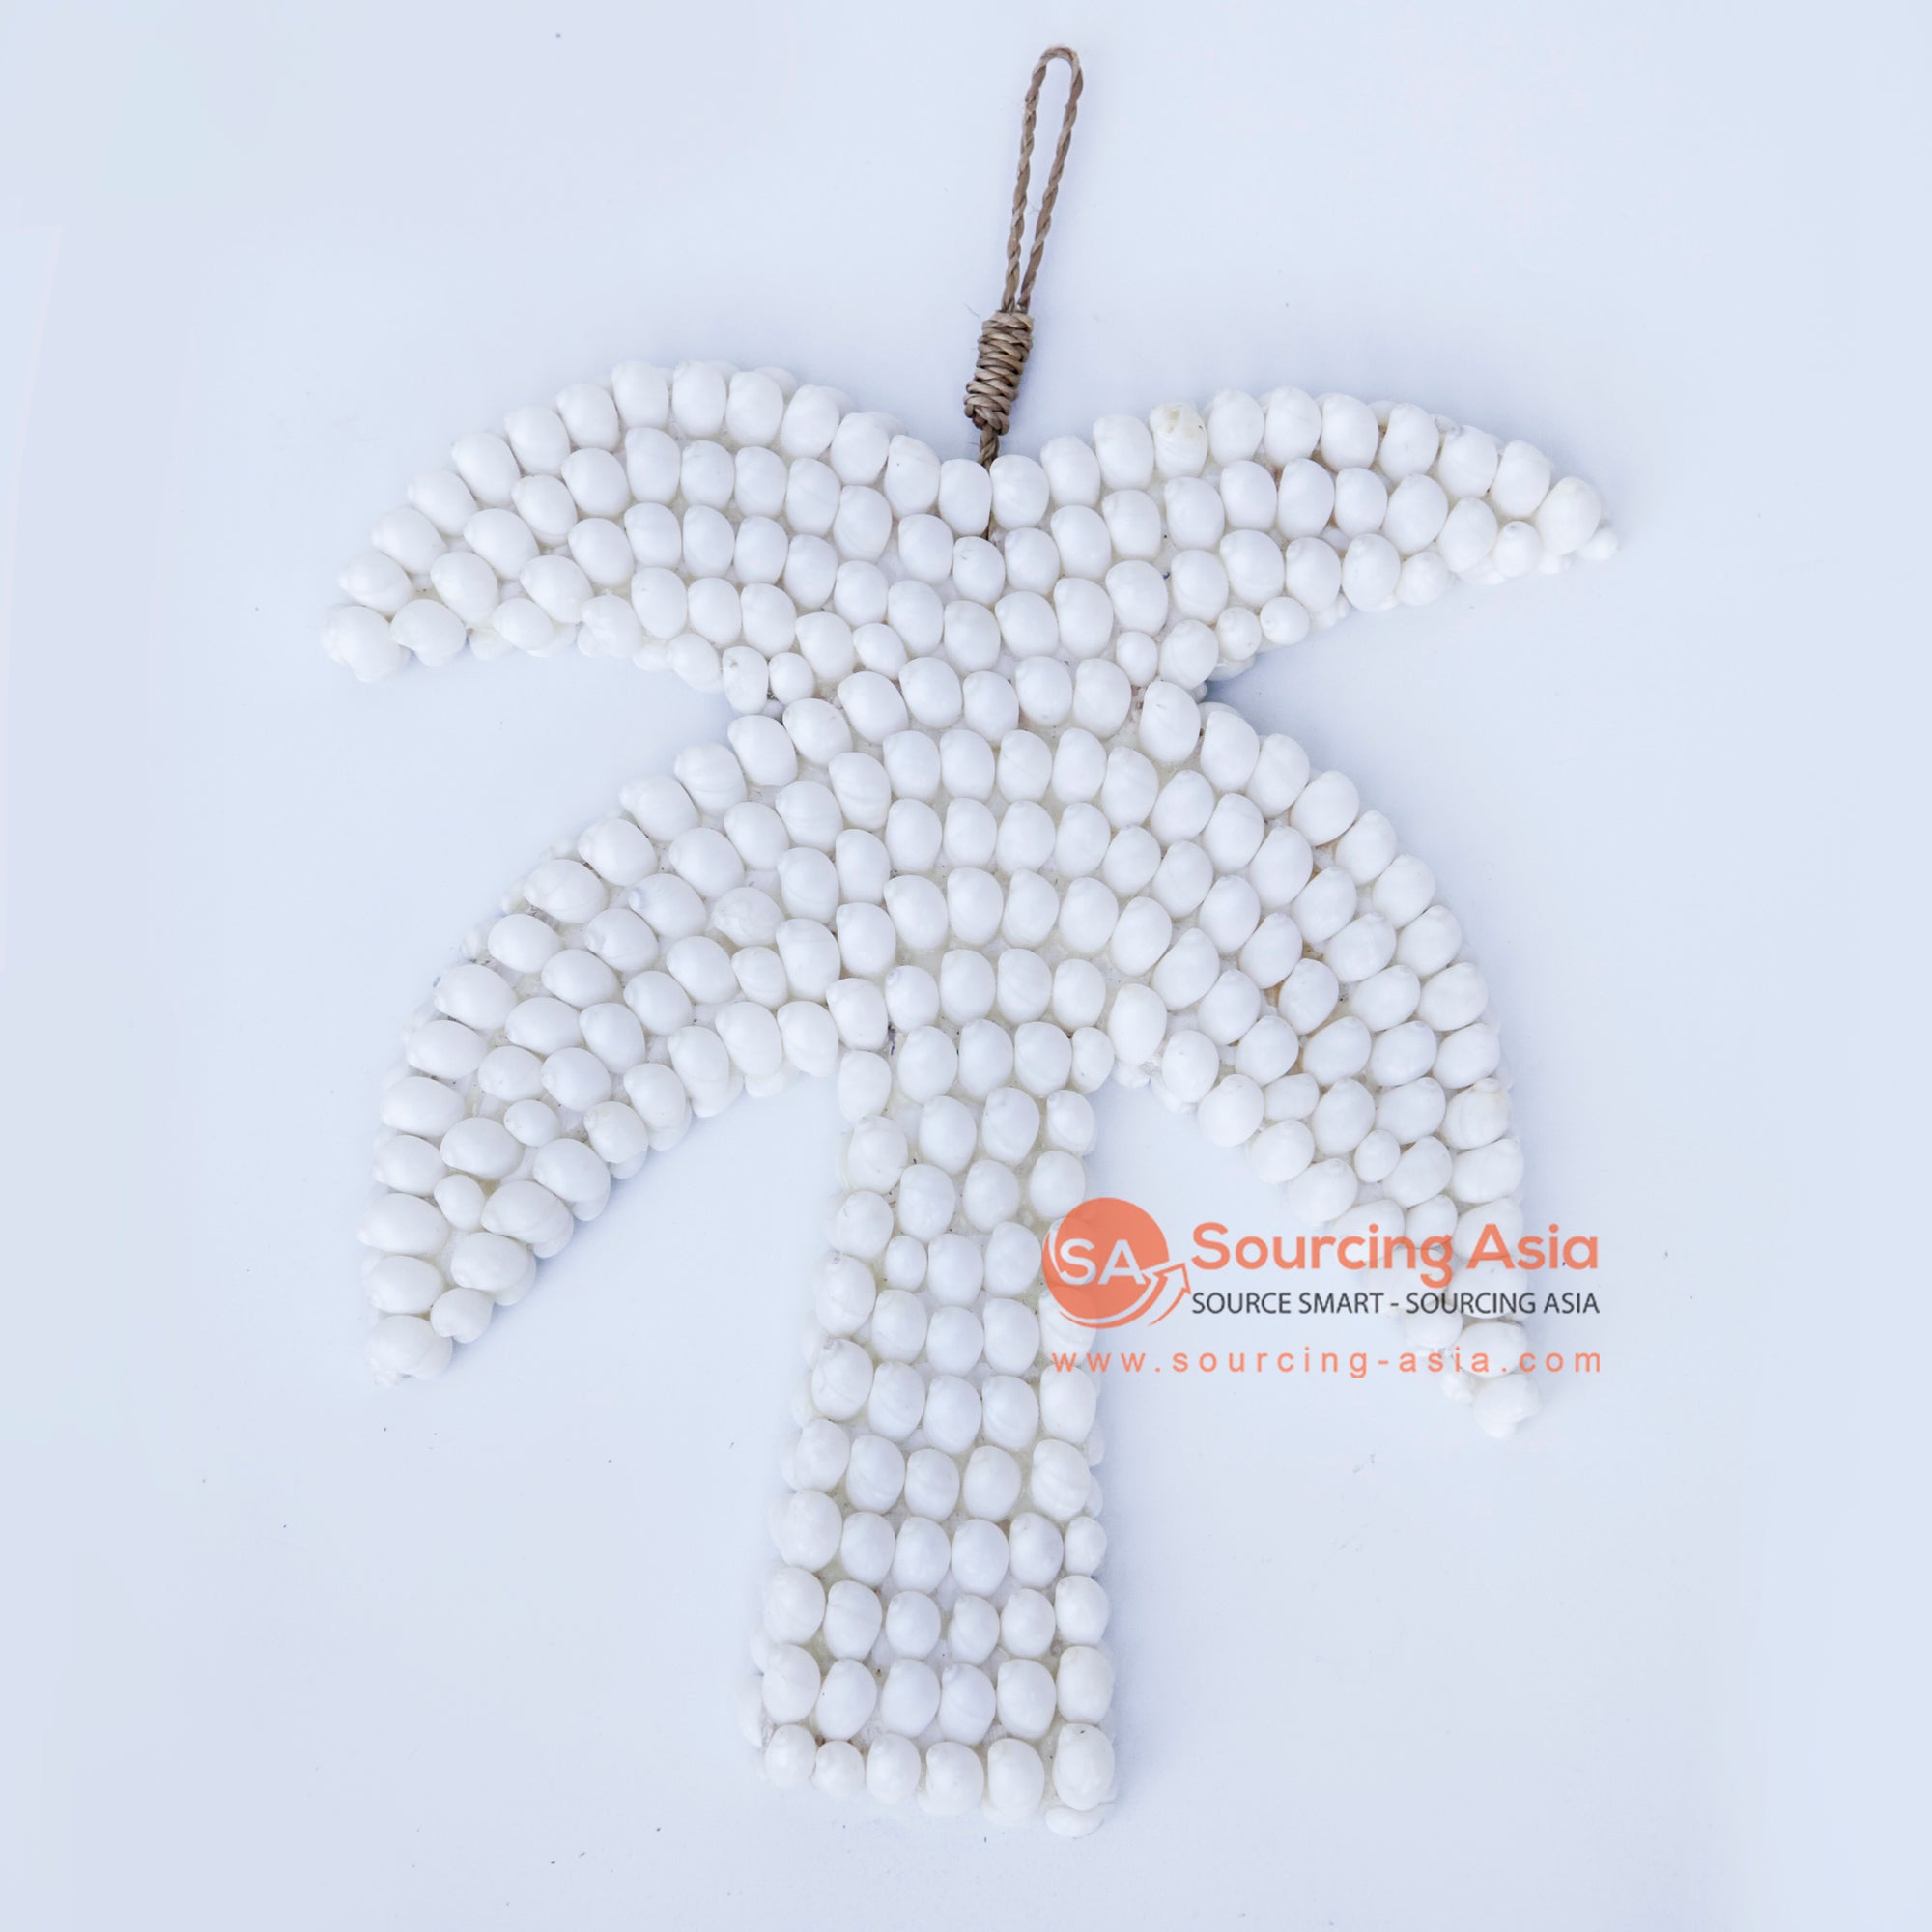 DHL043 WHITE SHELL PALM TREE SHAPED HANGING WALL DECORATION